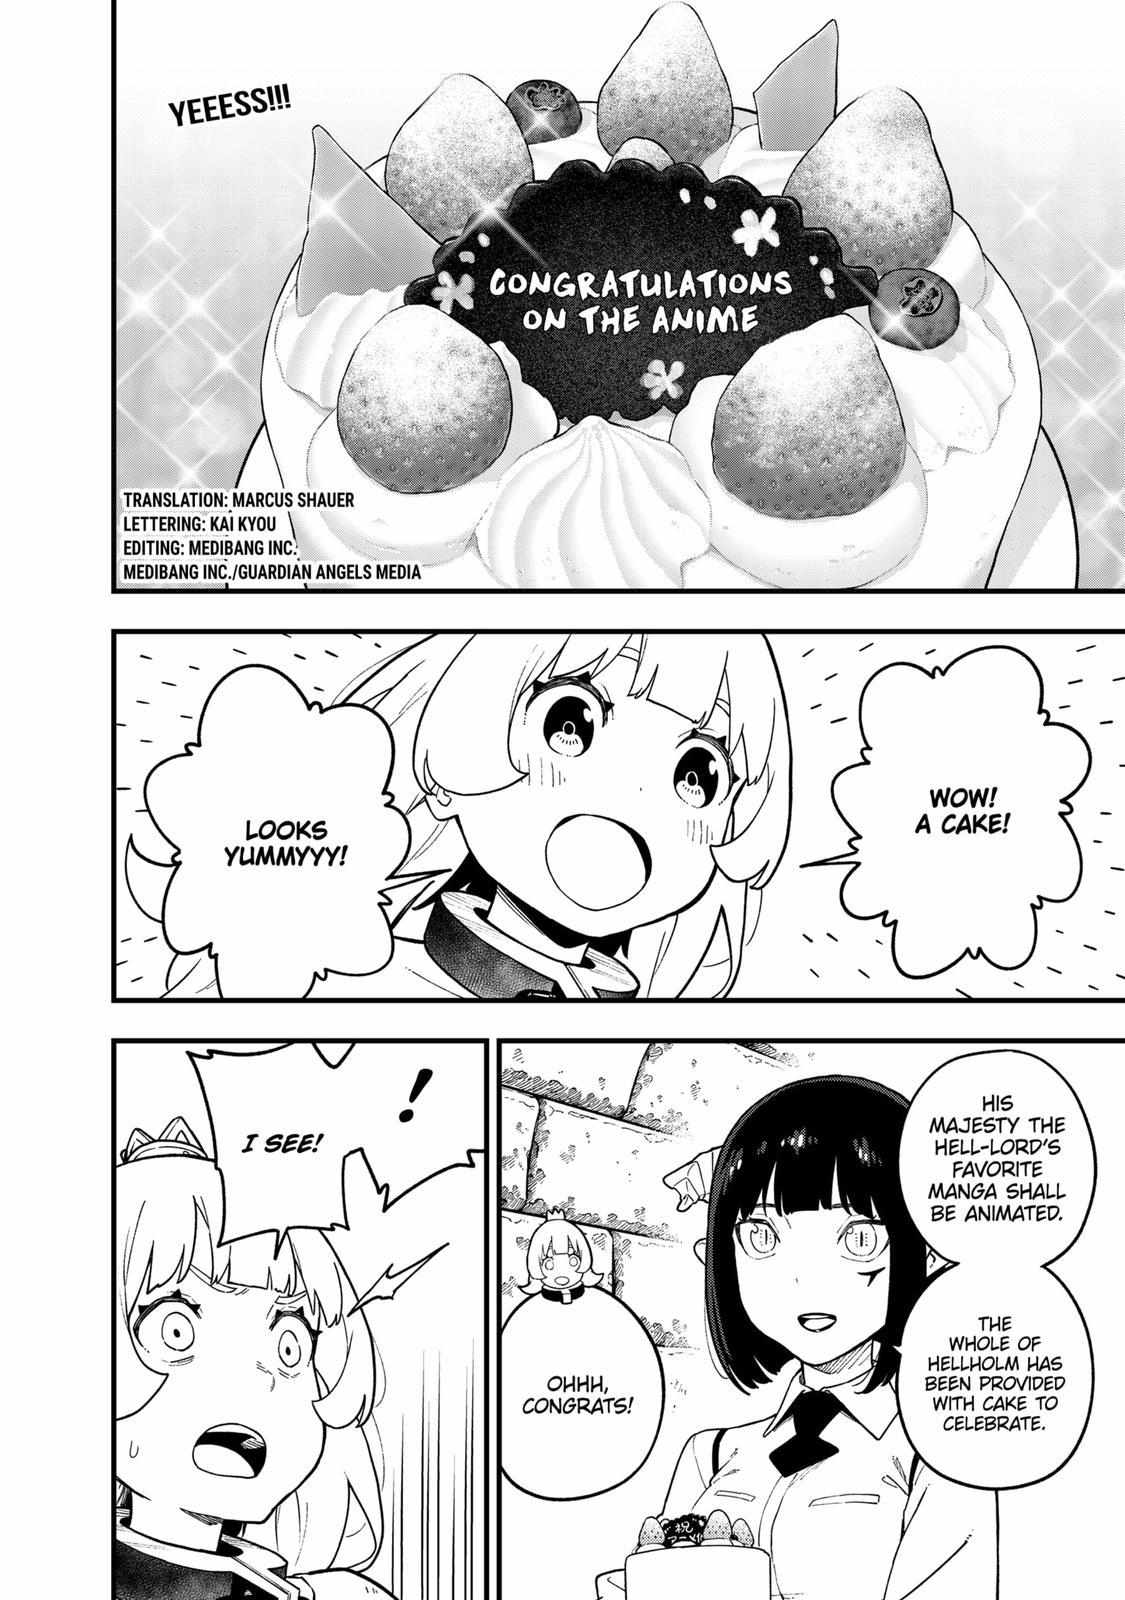 It's Time for "Interrogation", Princess! - chapter 192 - #2